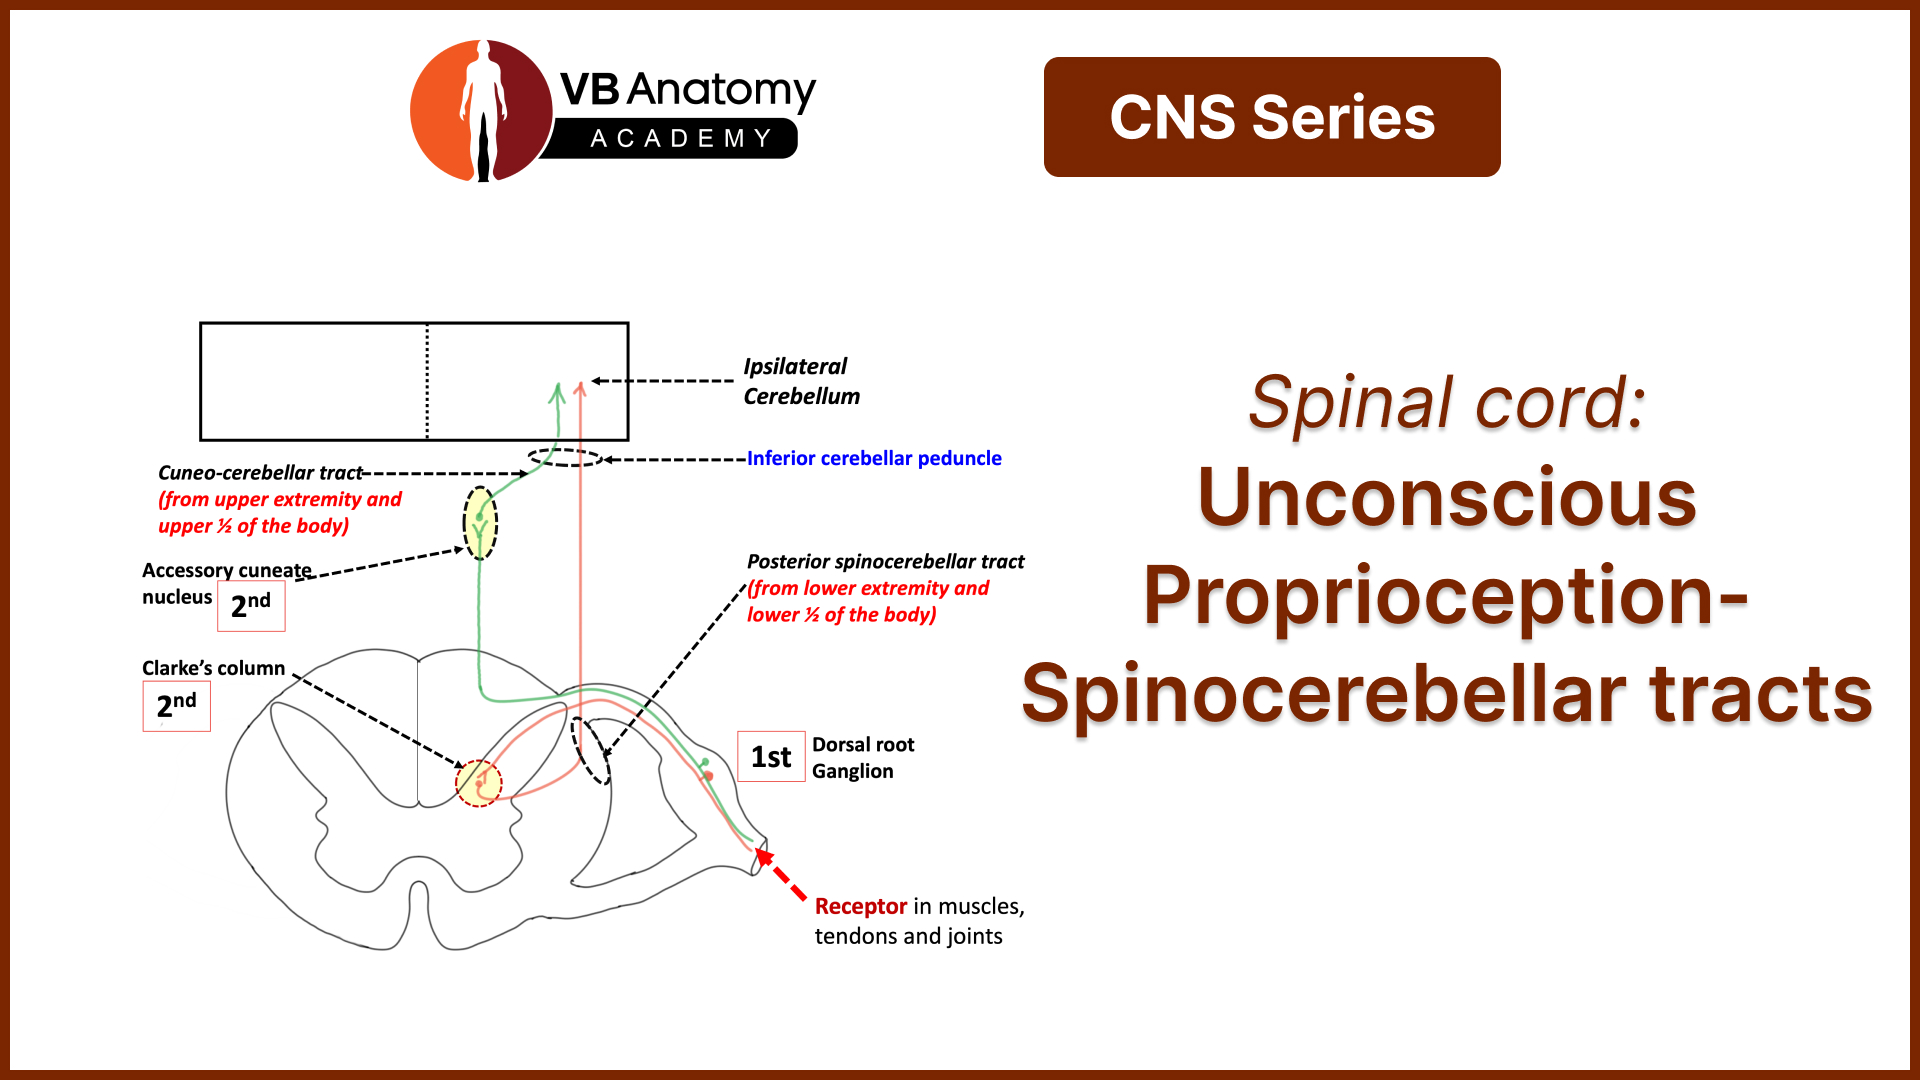 Spinal cord: Unconscious Proprioception Spinocerebellar Tracts